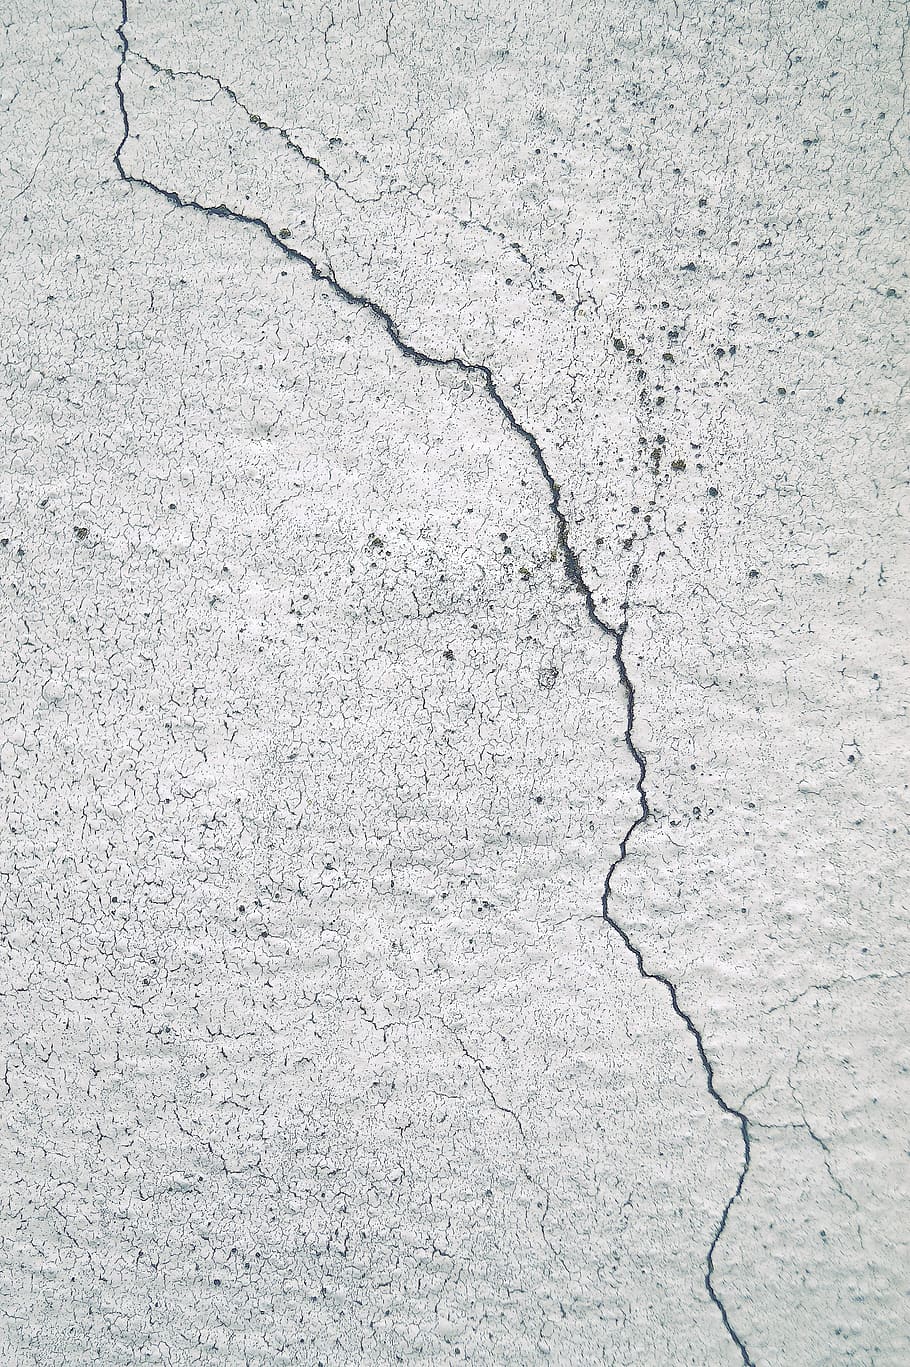 Crack, Facade, Wall, Structure, Plaster, details, cracked, backgrounds, textured, damaged